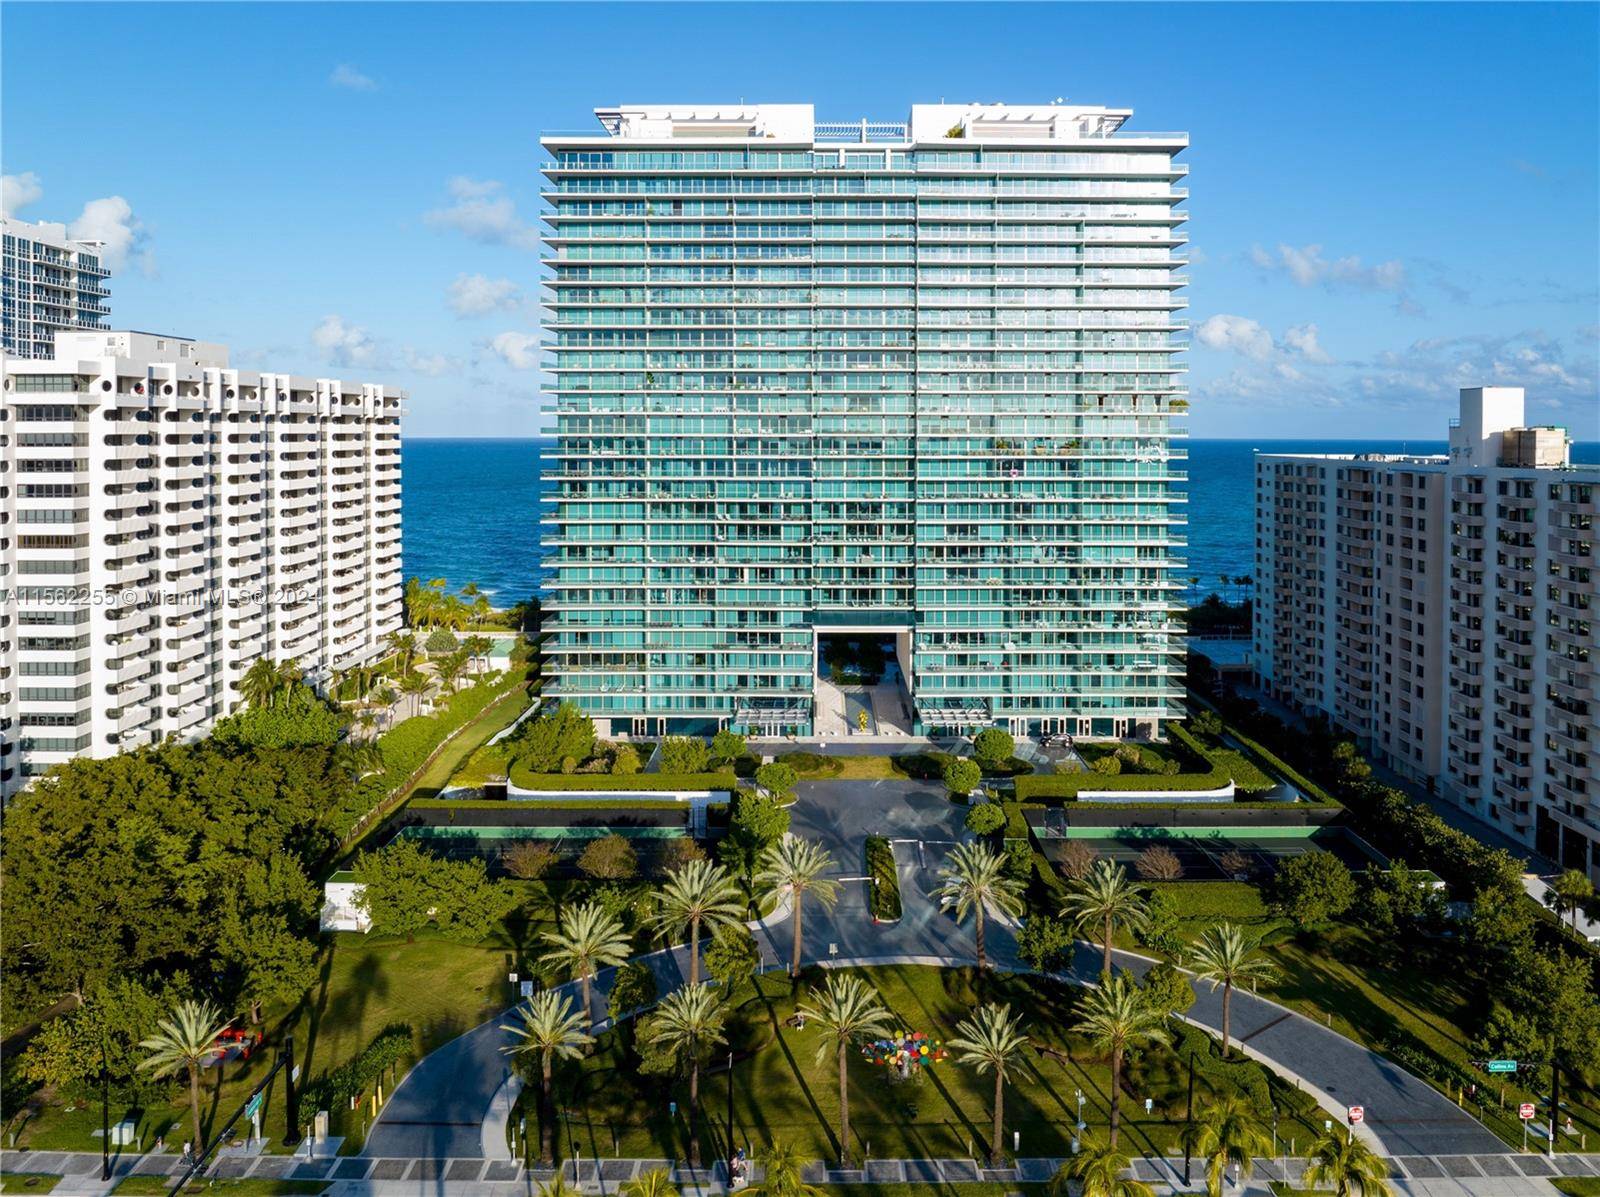 Experience luxury living at Oceana Bal Harbour.